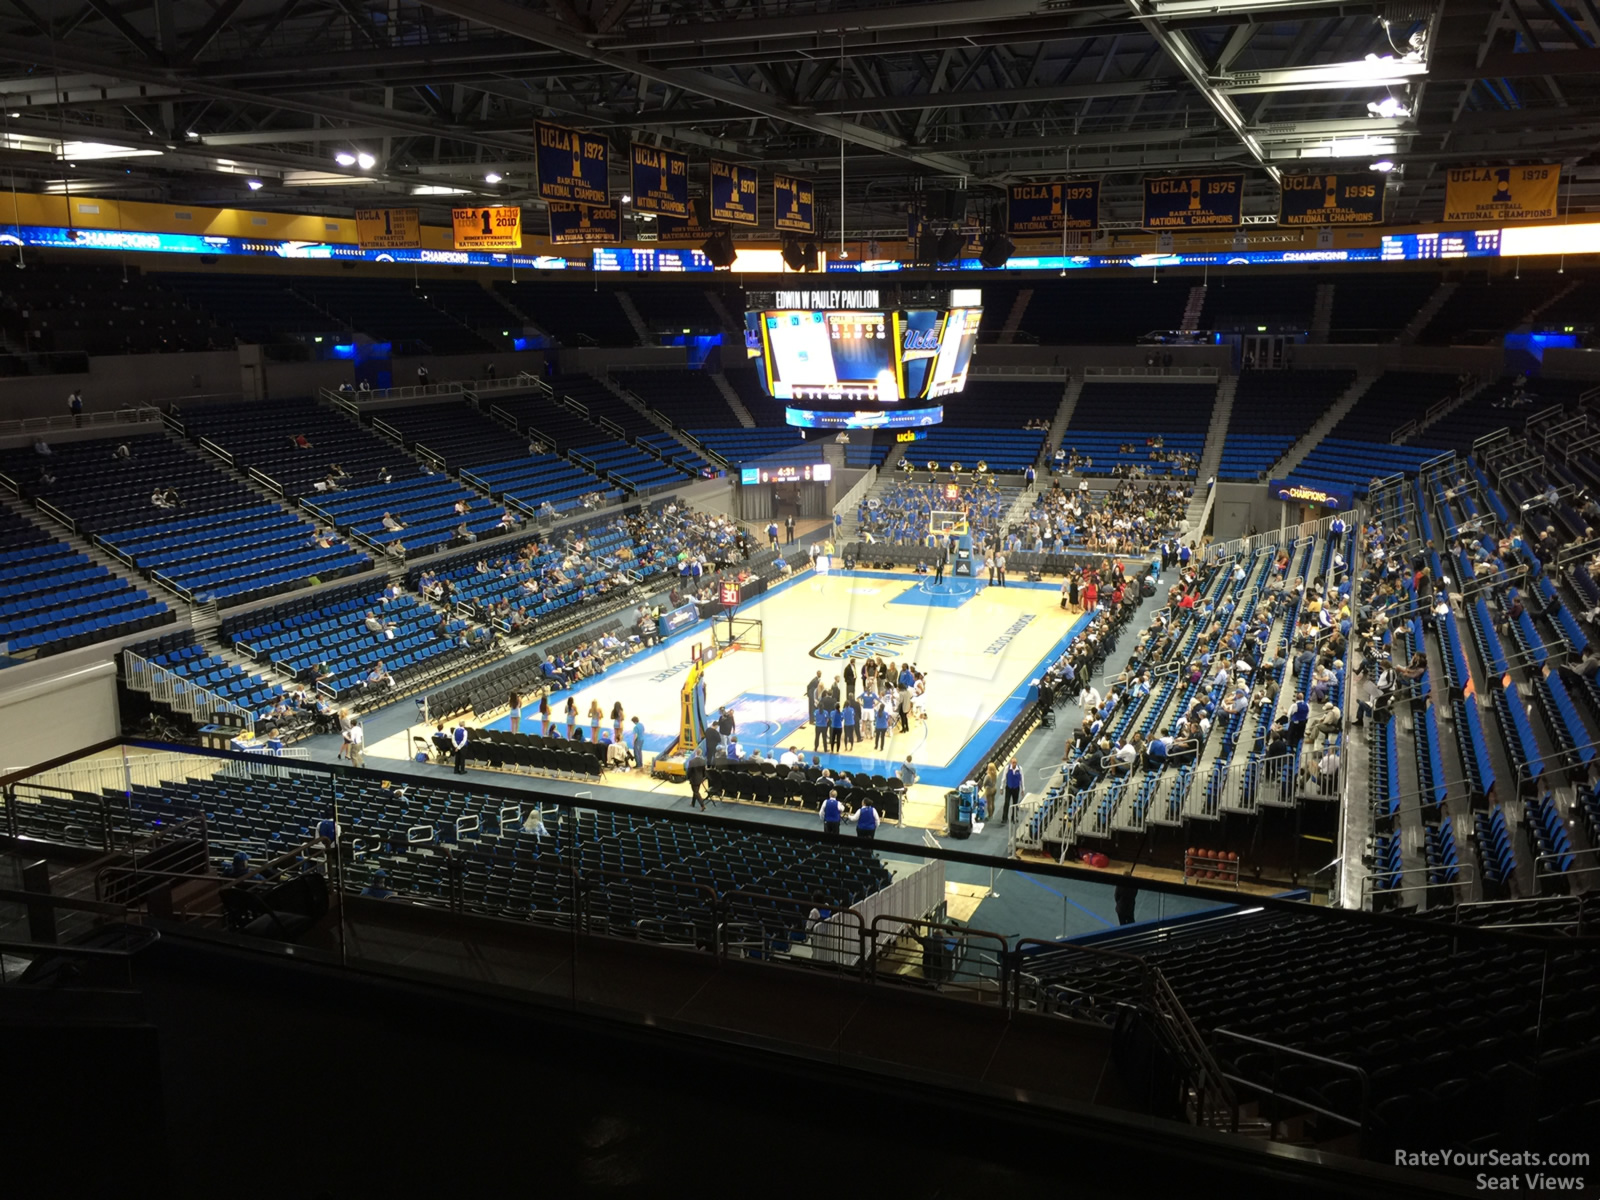 section 207, row 6 seat view  - pauley pavilion